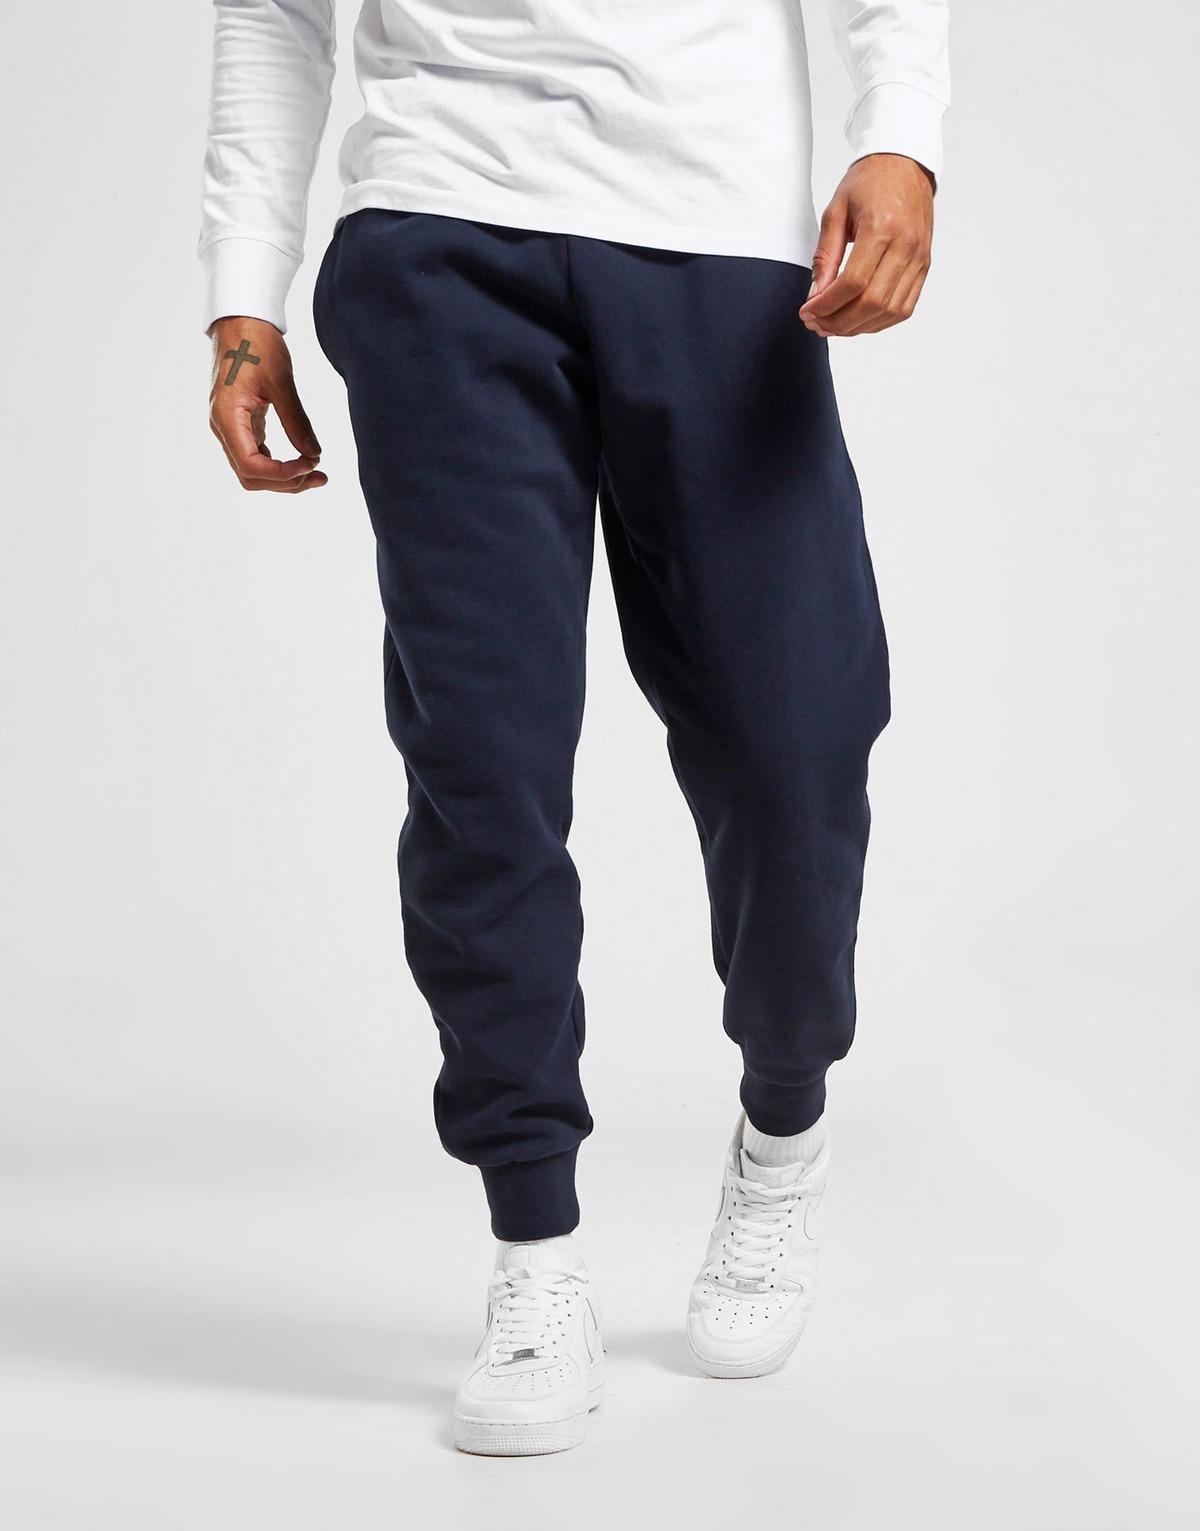 Timberland Core Small Logo Fleece Joggers in Navy (Blue) for Men - Lyst